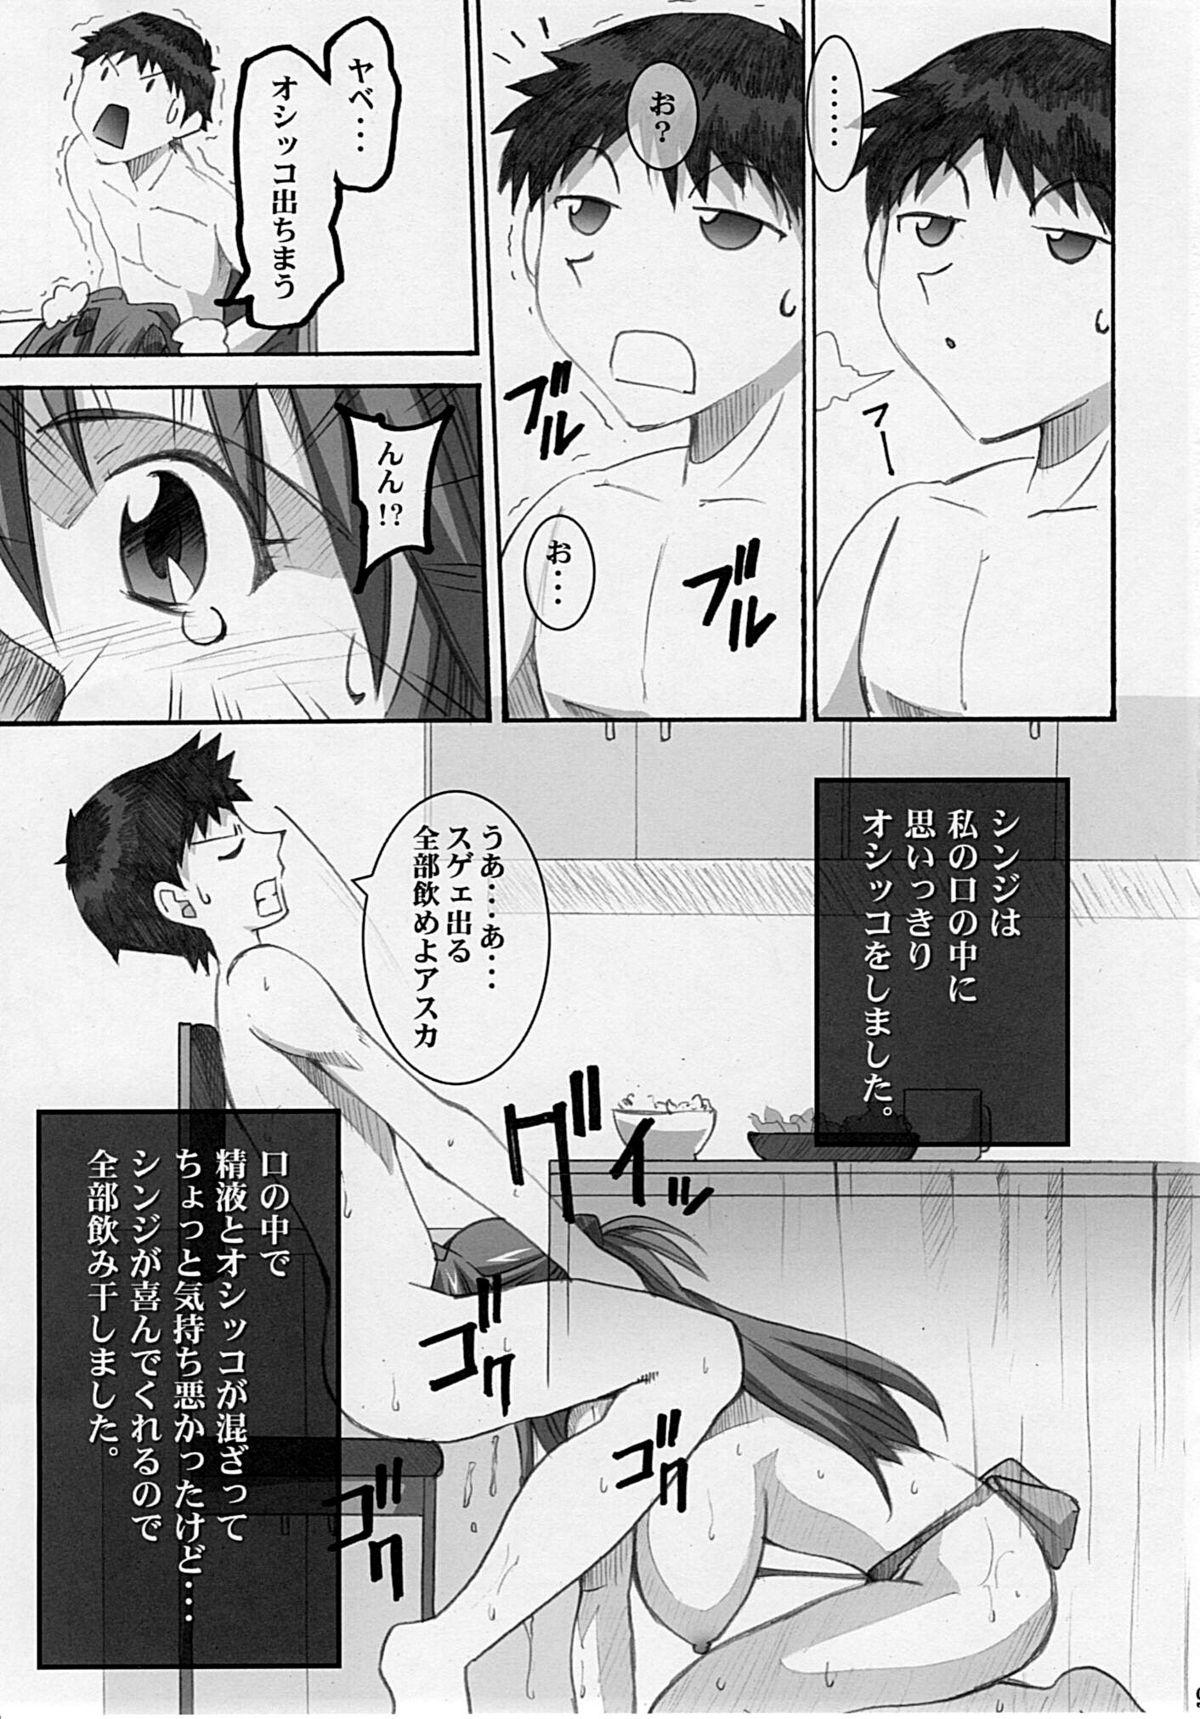 Sex Pussy Asuka's Diary 01 - Neon genesis evangelion Amateur Pussy - Page 8